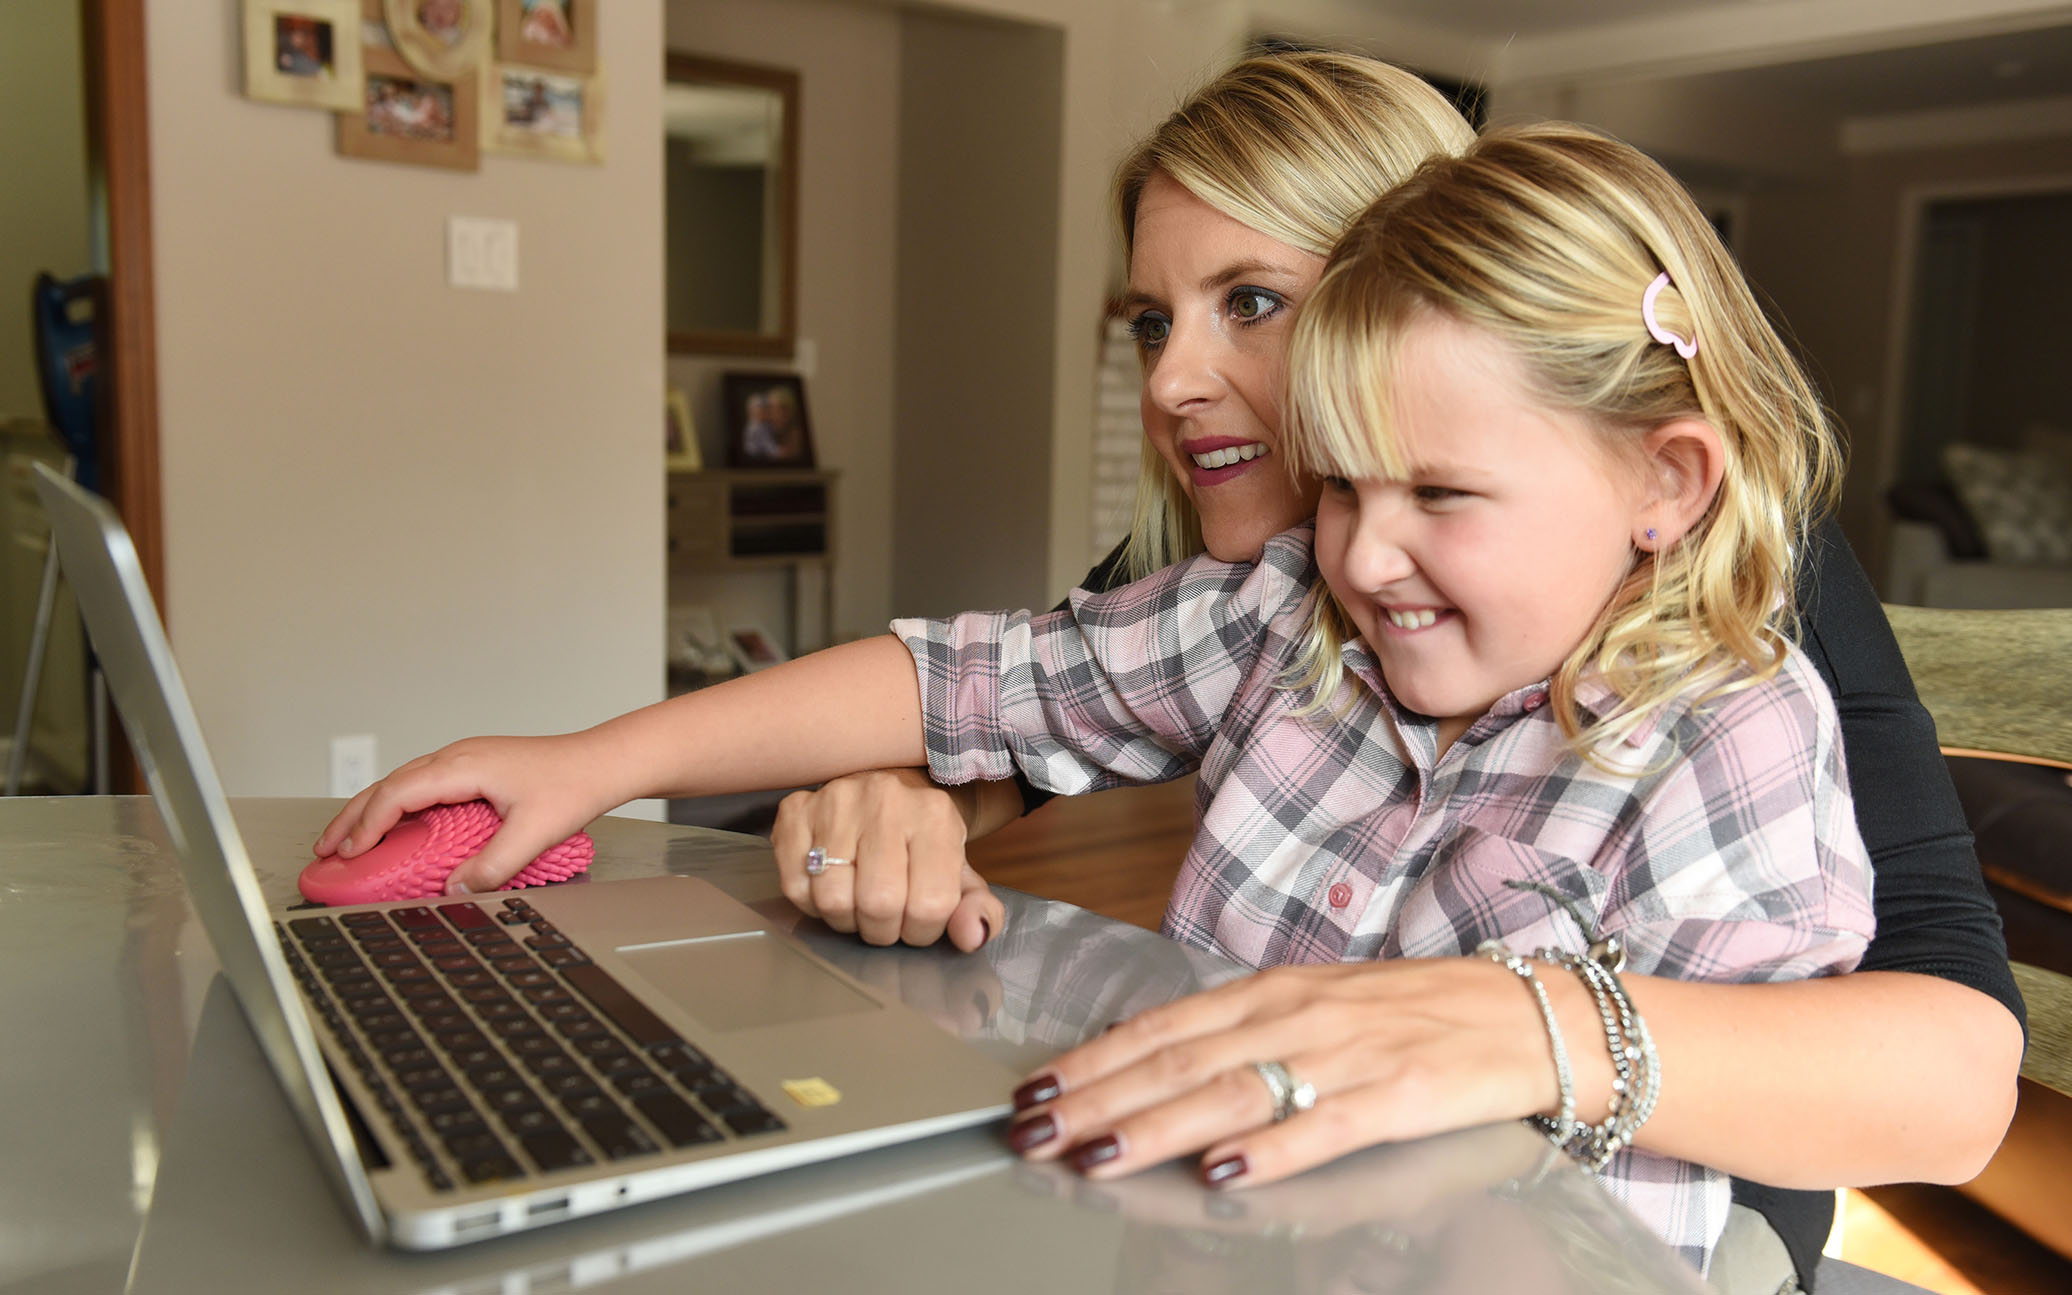 This Company Reinvented The Computer Mouse For Kids With Special Needs